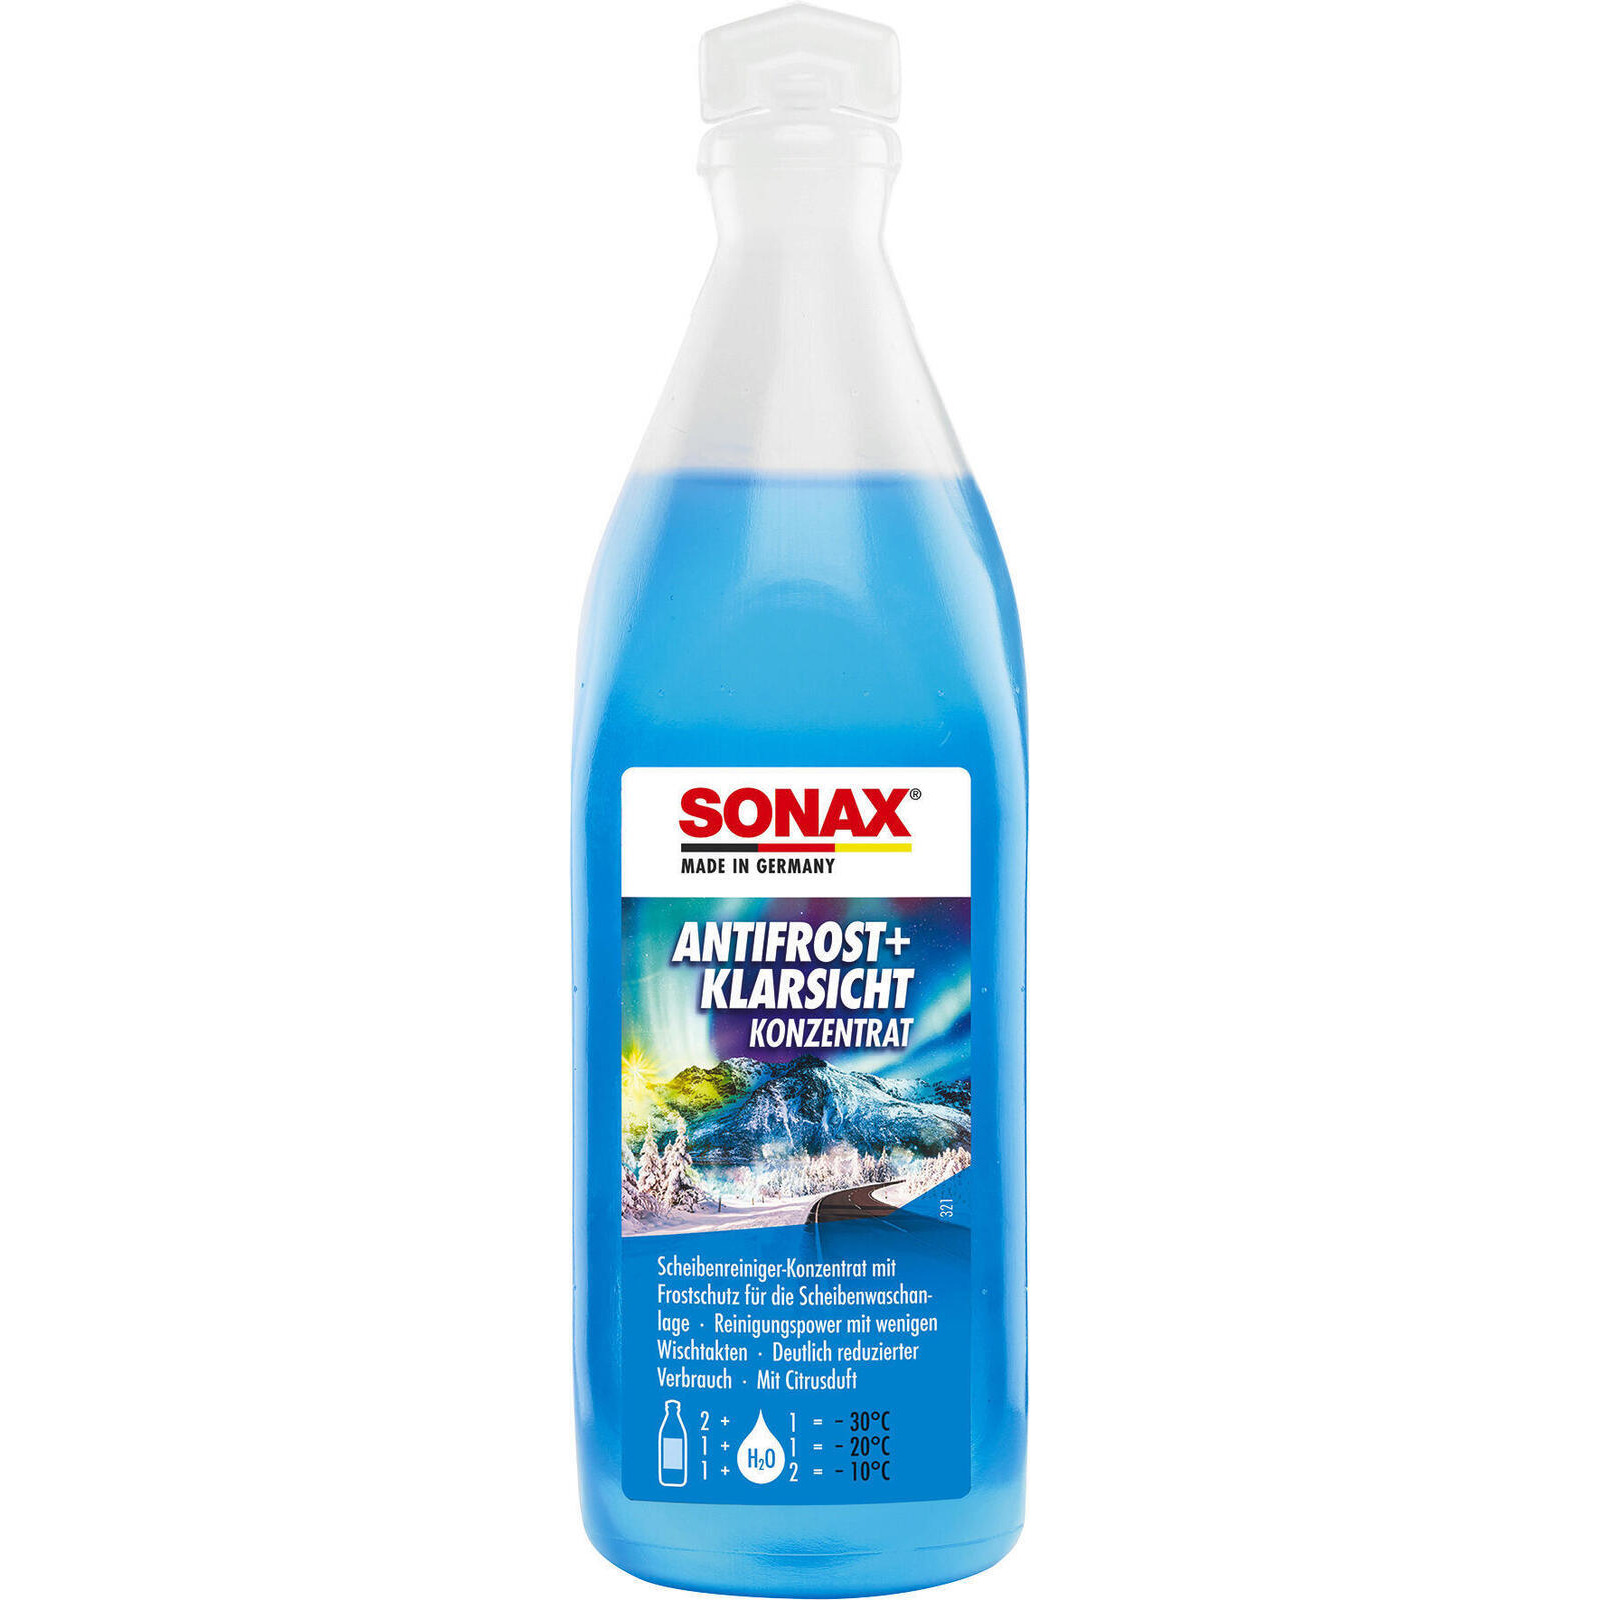 SONAX Antifreeze, window cleaning system Antifreeze + clear view concentrate